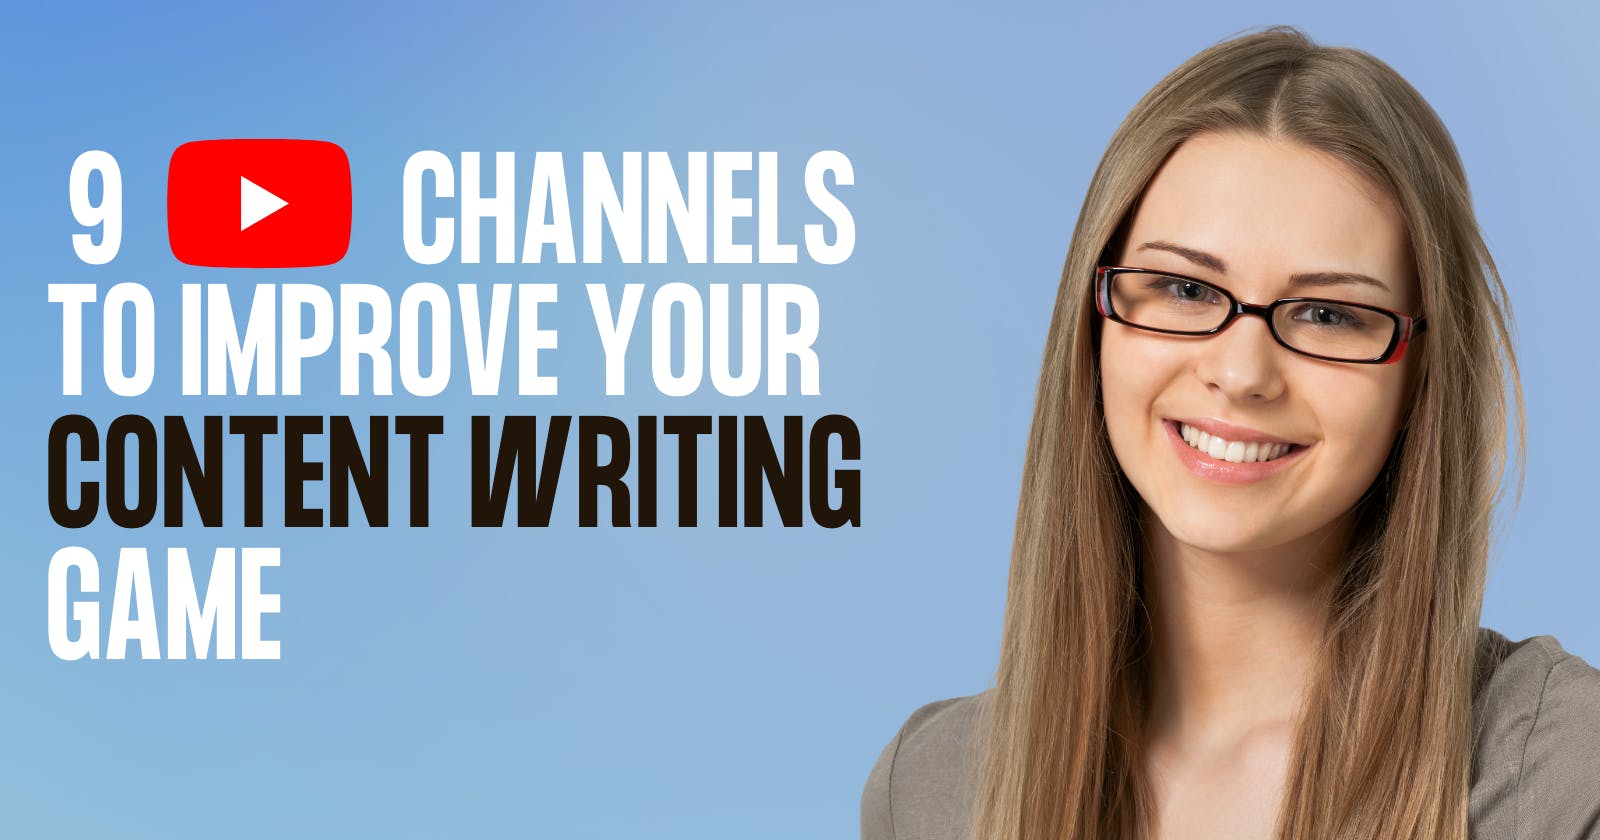 9 YouTube Channels to Improve Your Content Writing Game